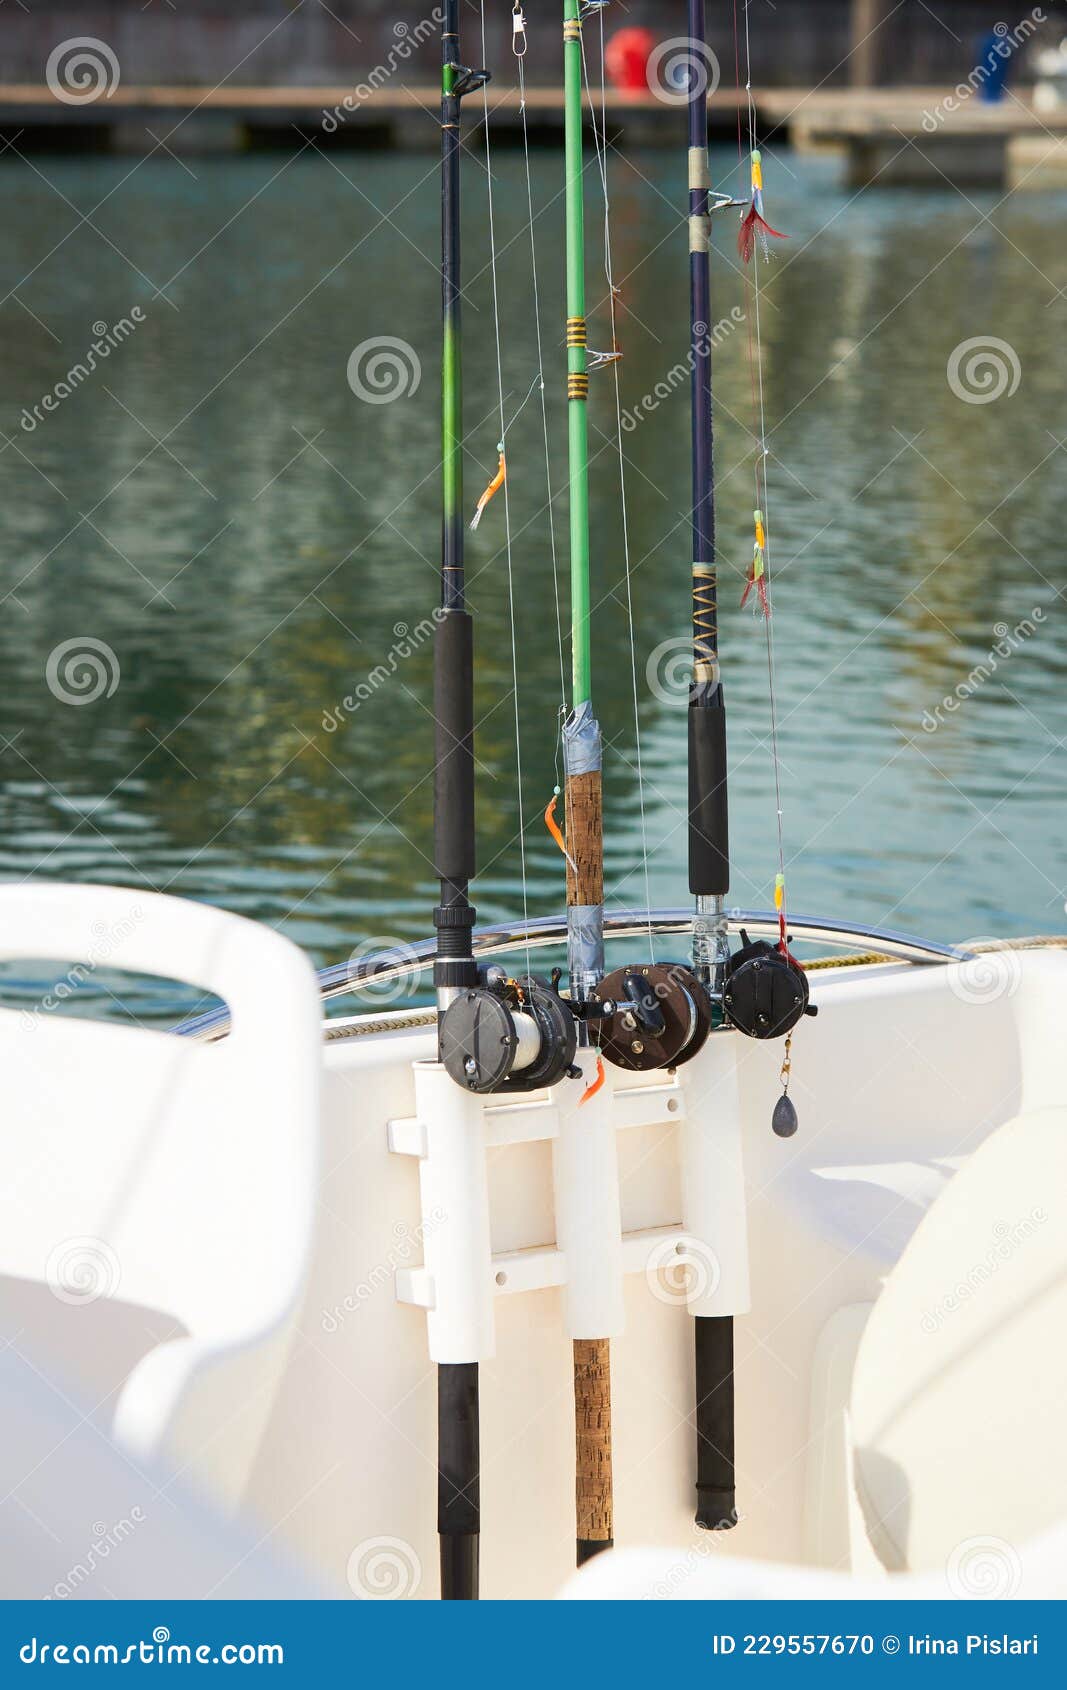 Fishing Rods with Hooks on the Boat in Natural Setting. CloseupFishing Rods  with Hooks on the Boat in Natural Setting Stock Photo - Image of fishing,  closeup: 229557670